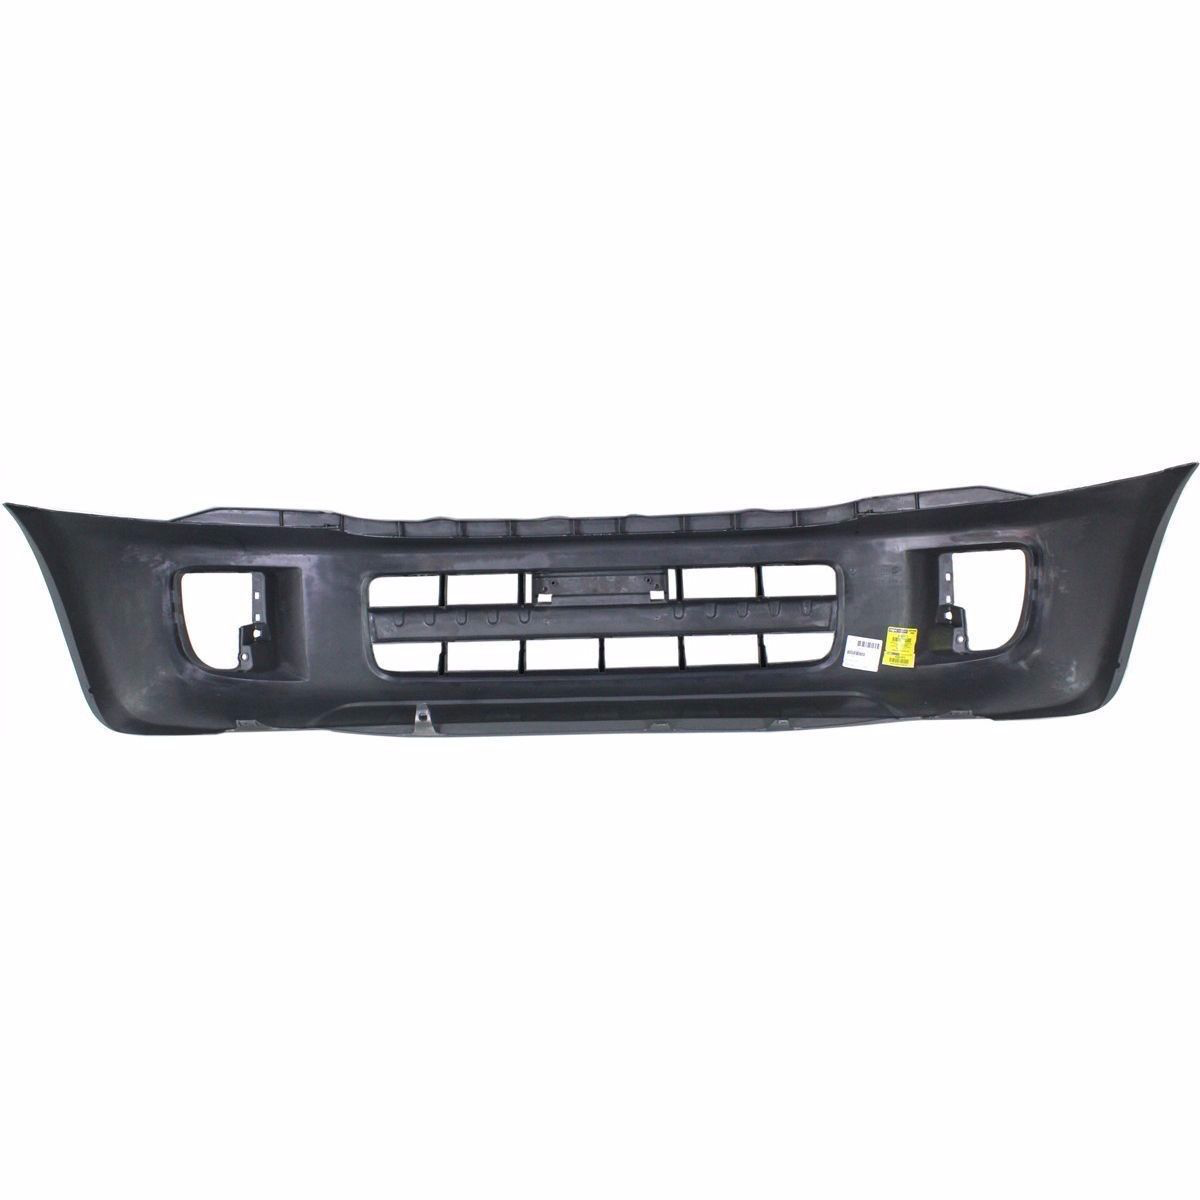 2001-2003 TOYOTA RAV4 Front Bumper Cover w/o Wheel Opng Flares  matte dark gray Painted to Match